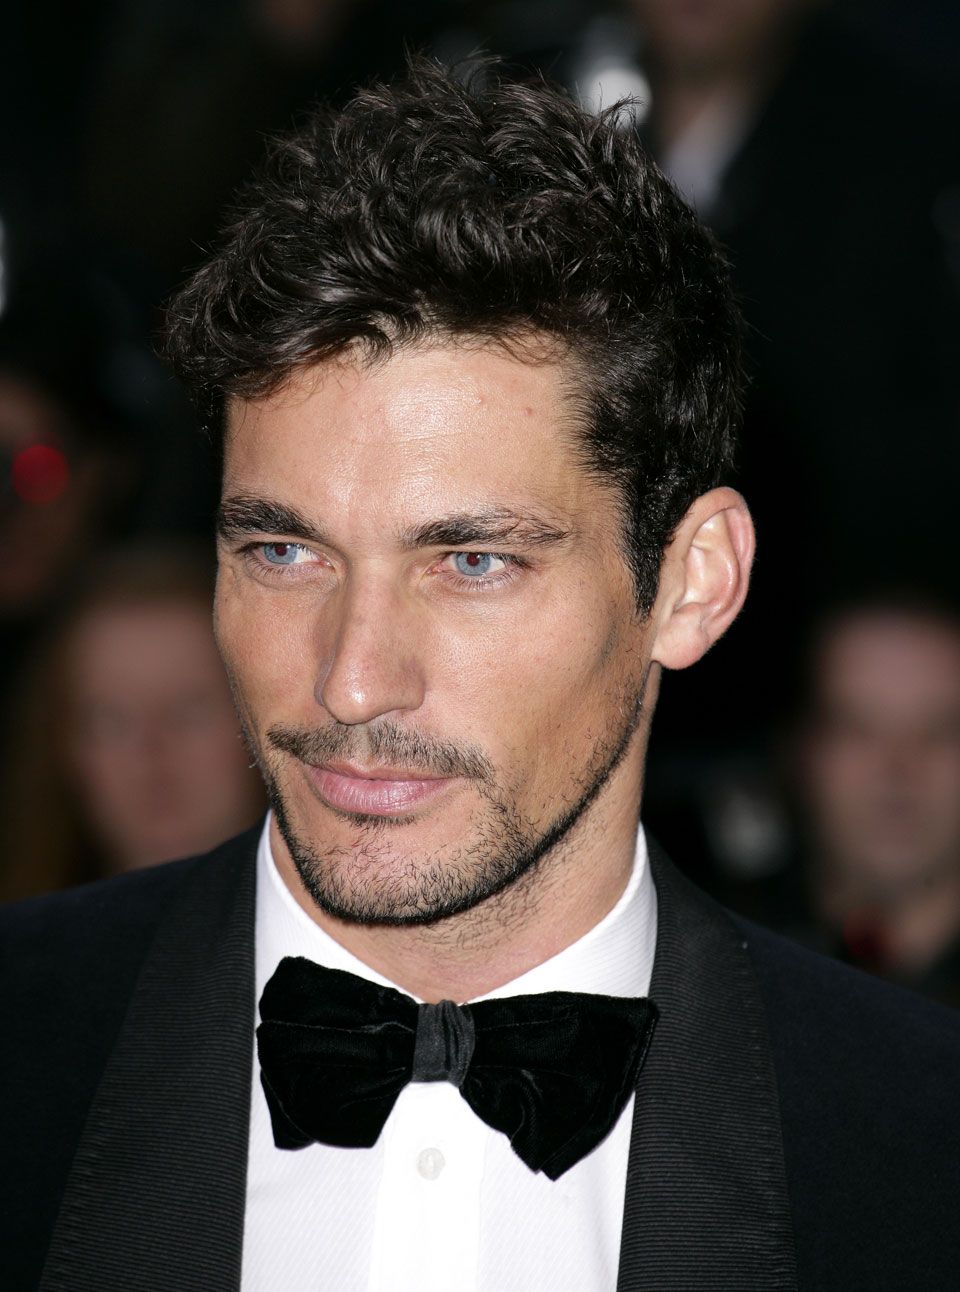 David Gandy supports International Women's Day action by appearing on ...